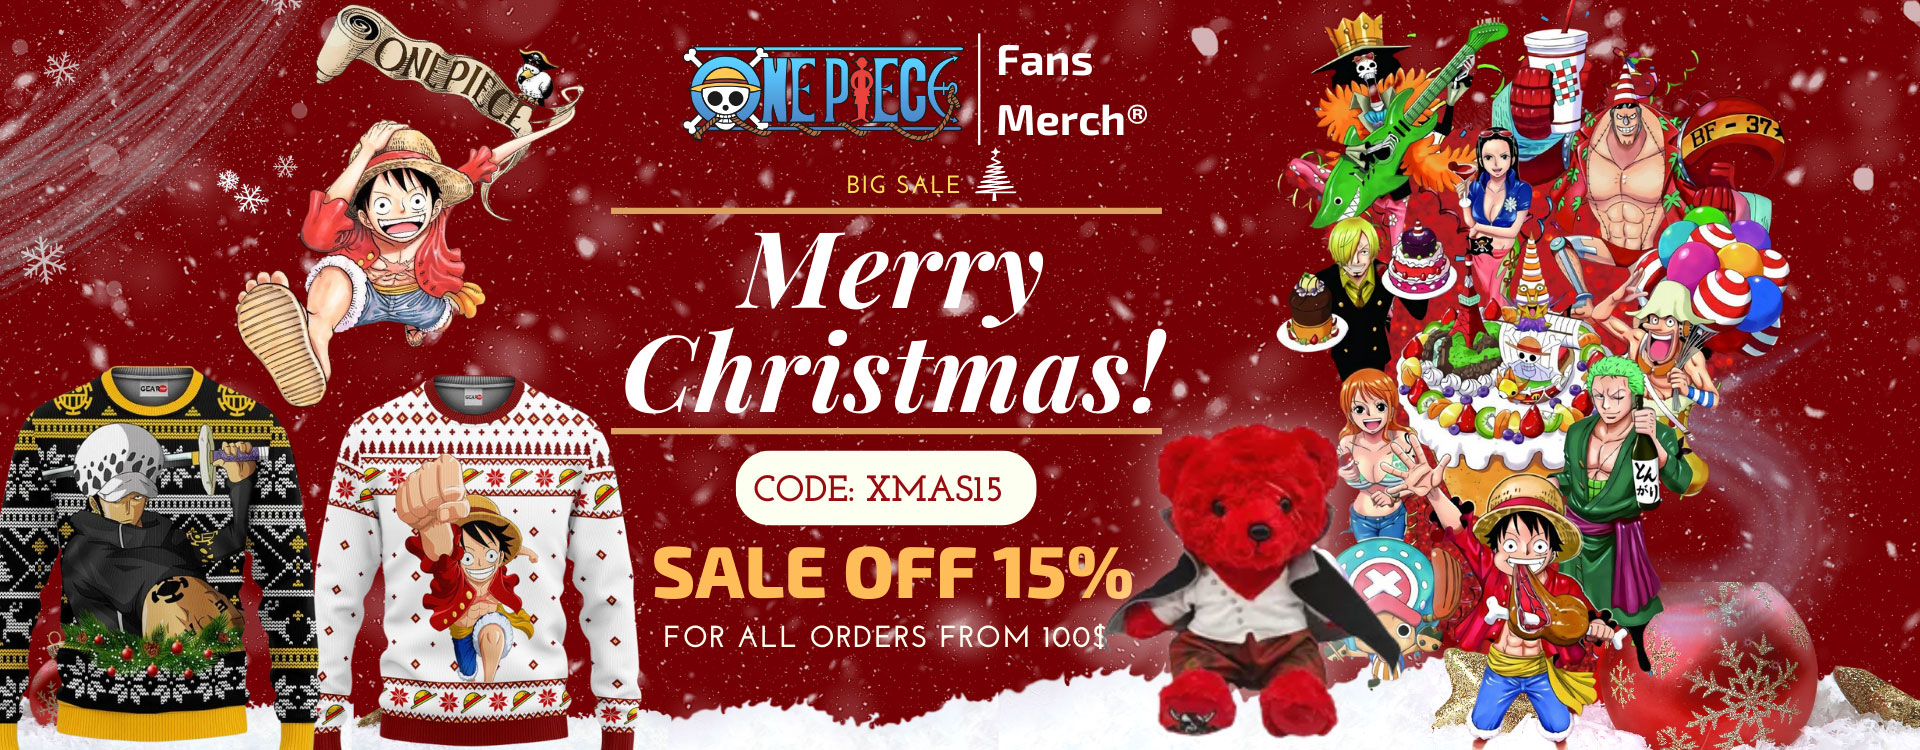 One Piece Store XMAS BANNER - One Piece Store